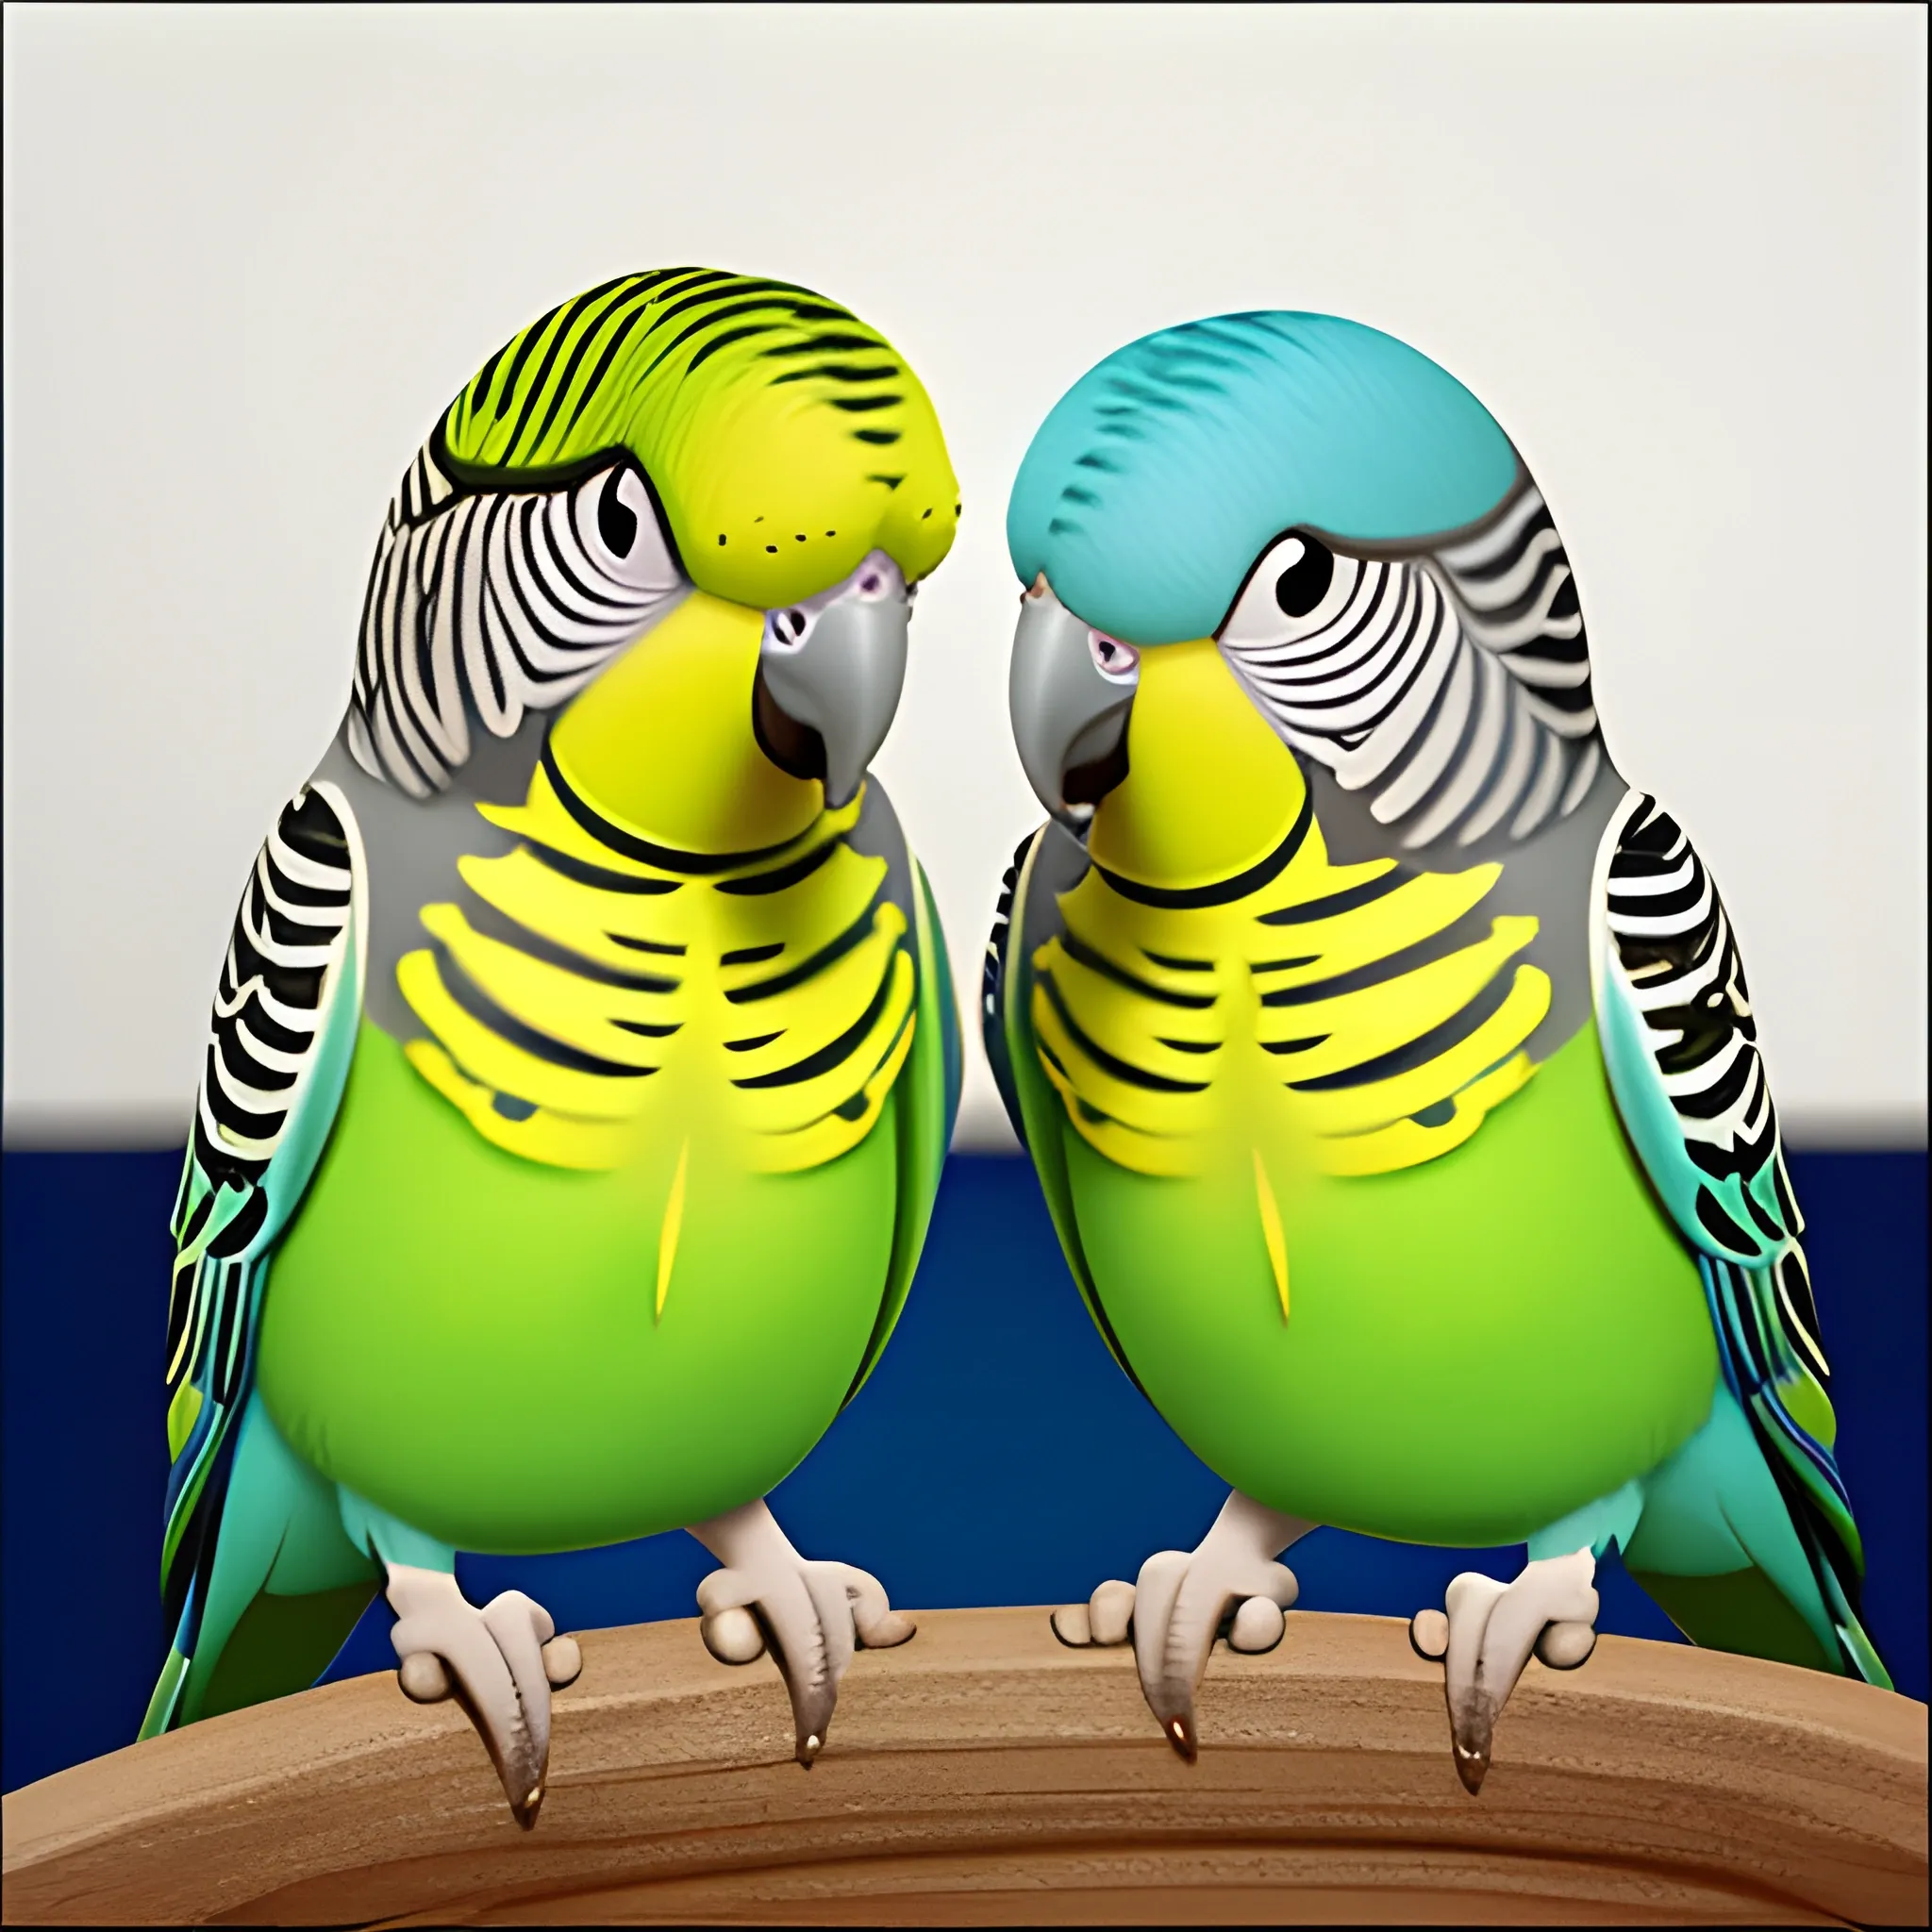 Pixar disney
Two budgies
Blue and green